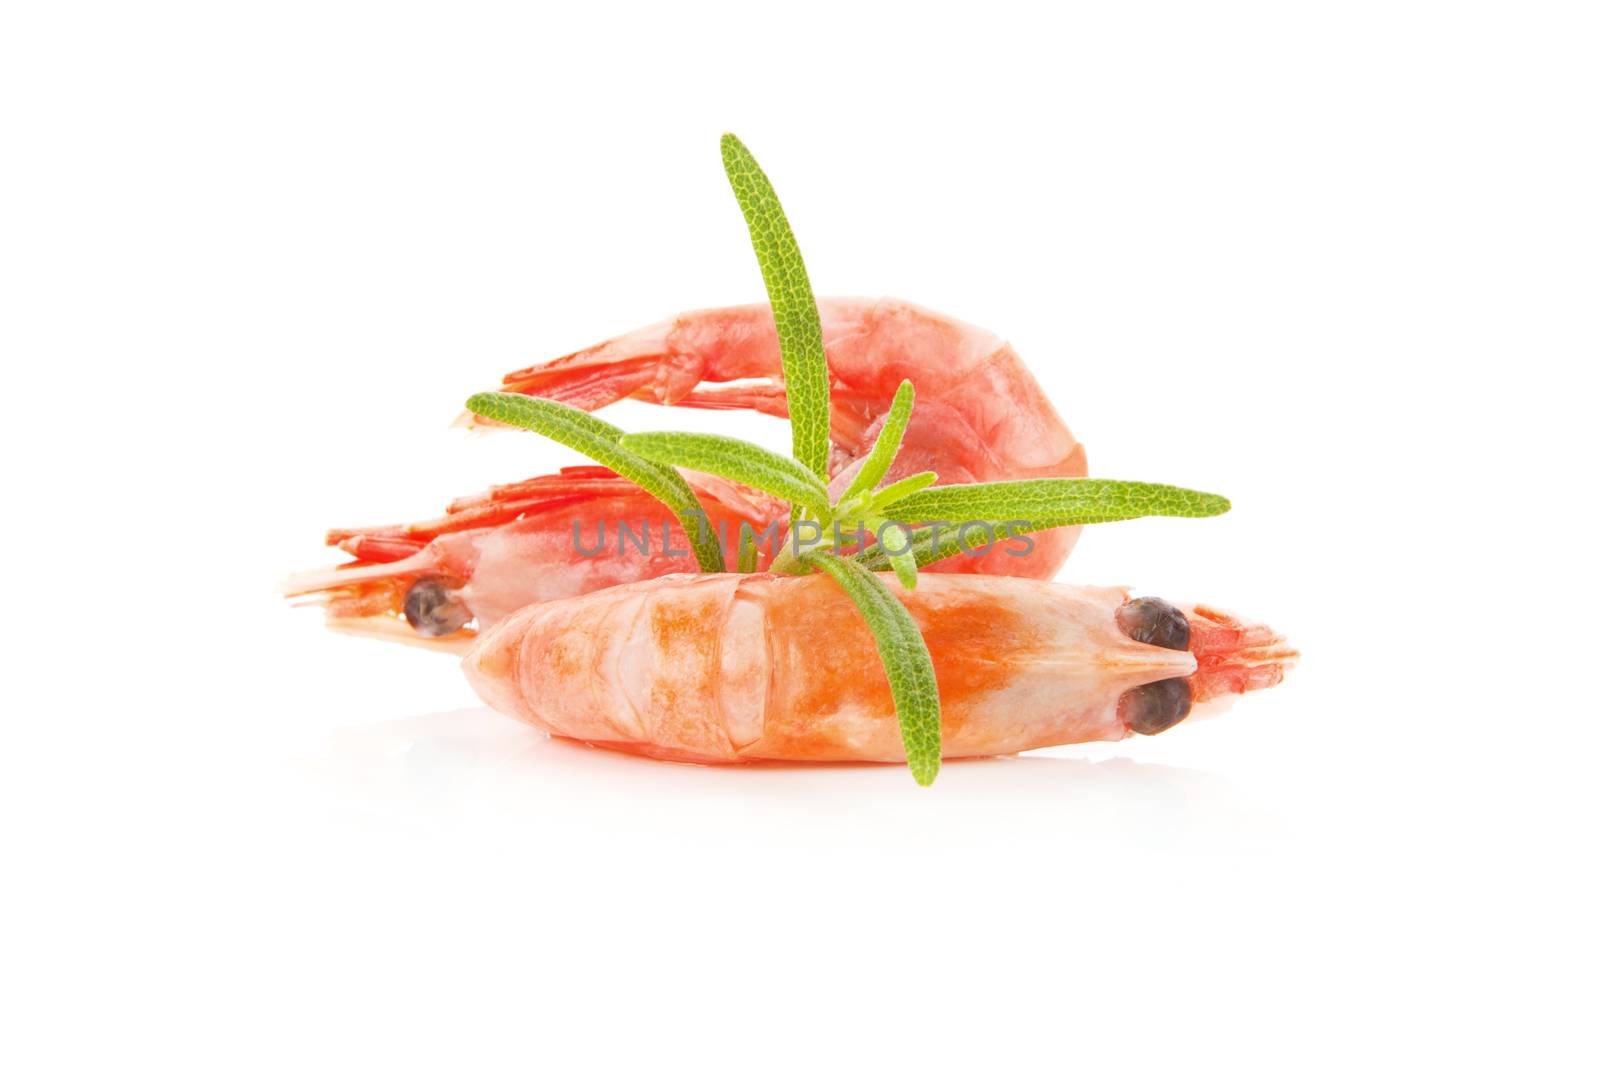 Shrimps with fresh herbs isolated on white background. Delicious seafood.